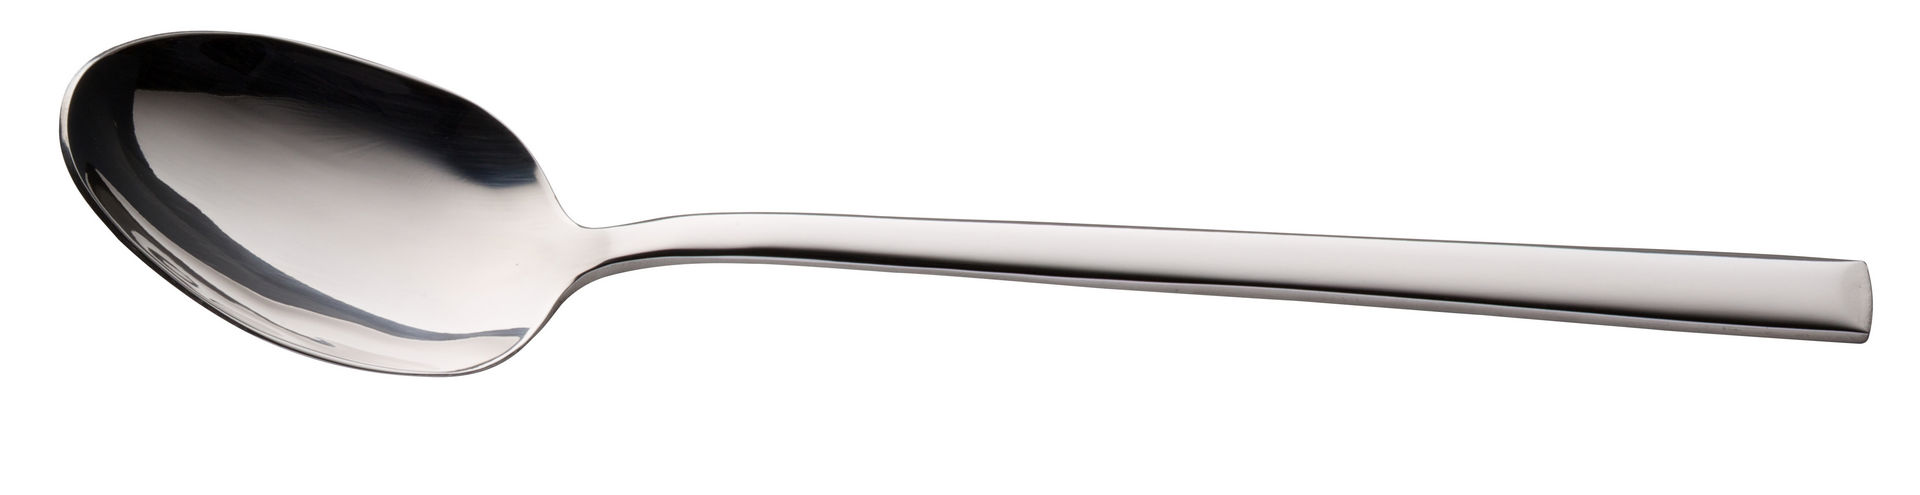 Signature Table Spoon - F10307-000000-B01012 (Pack of 12)